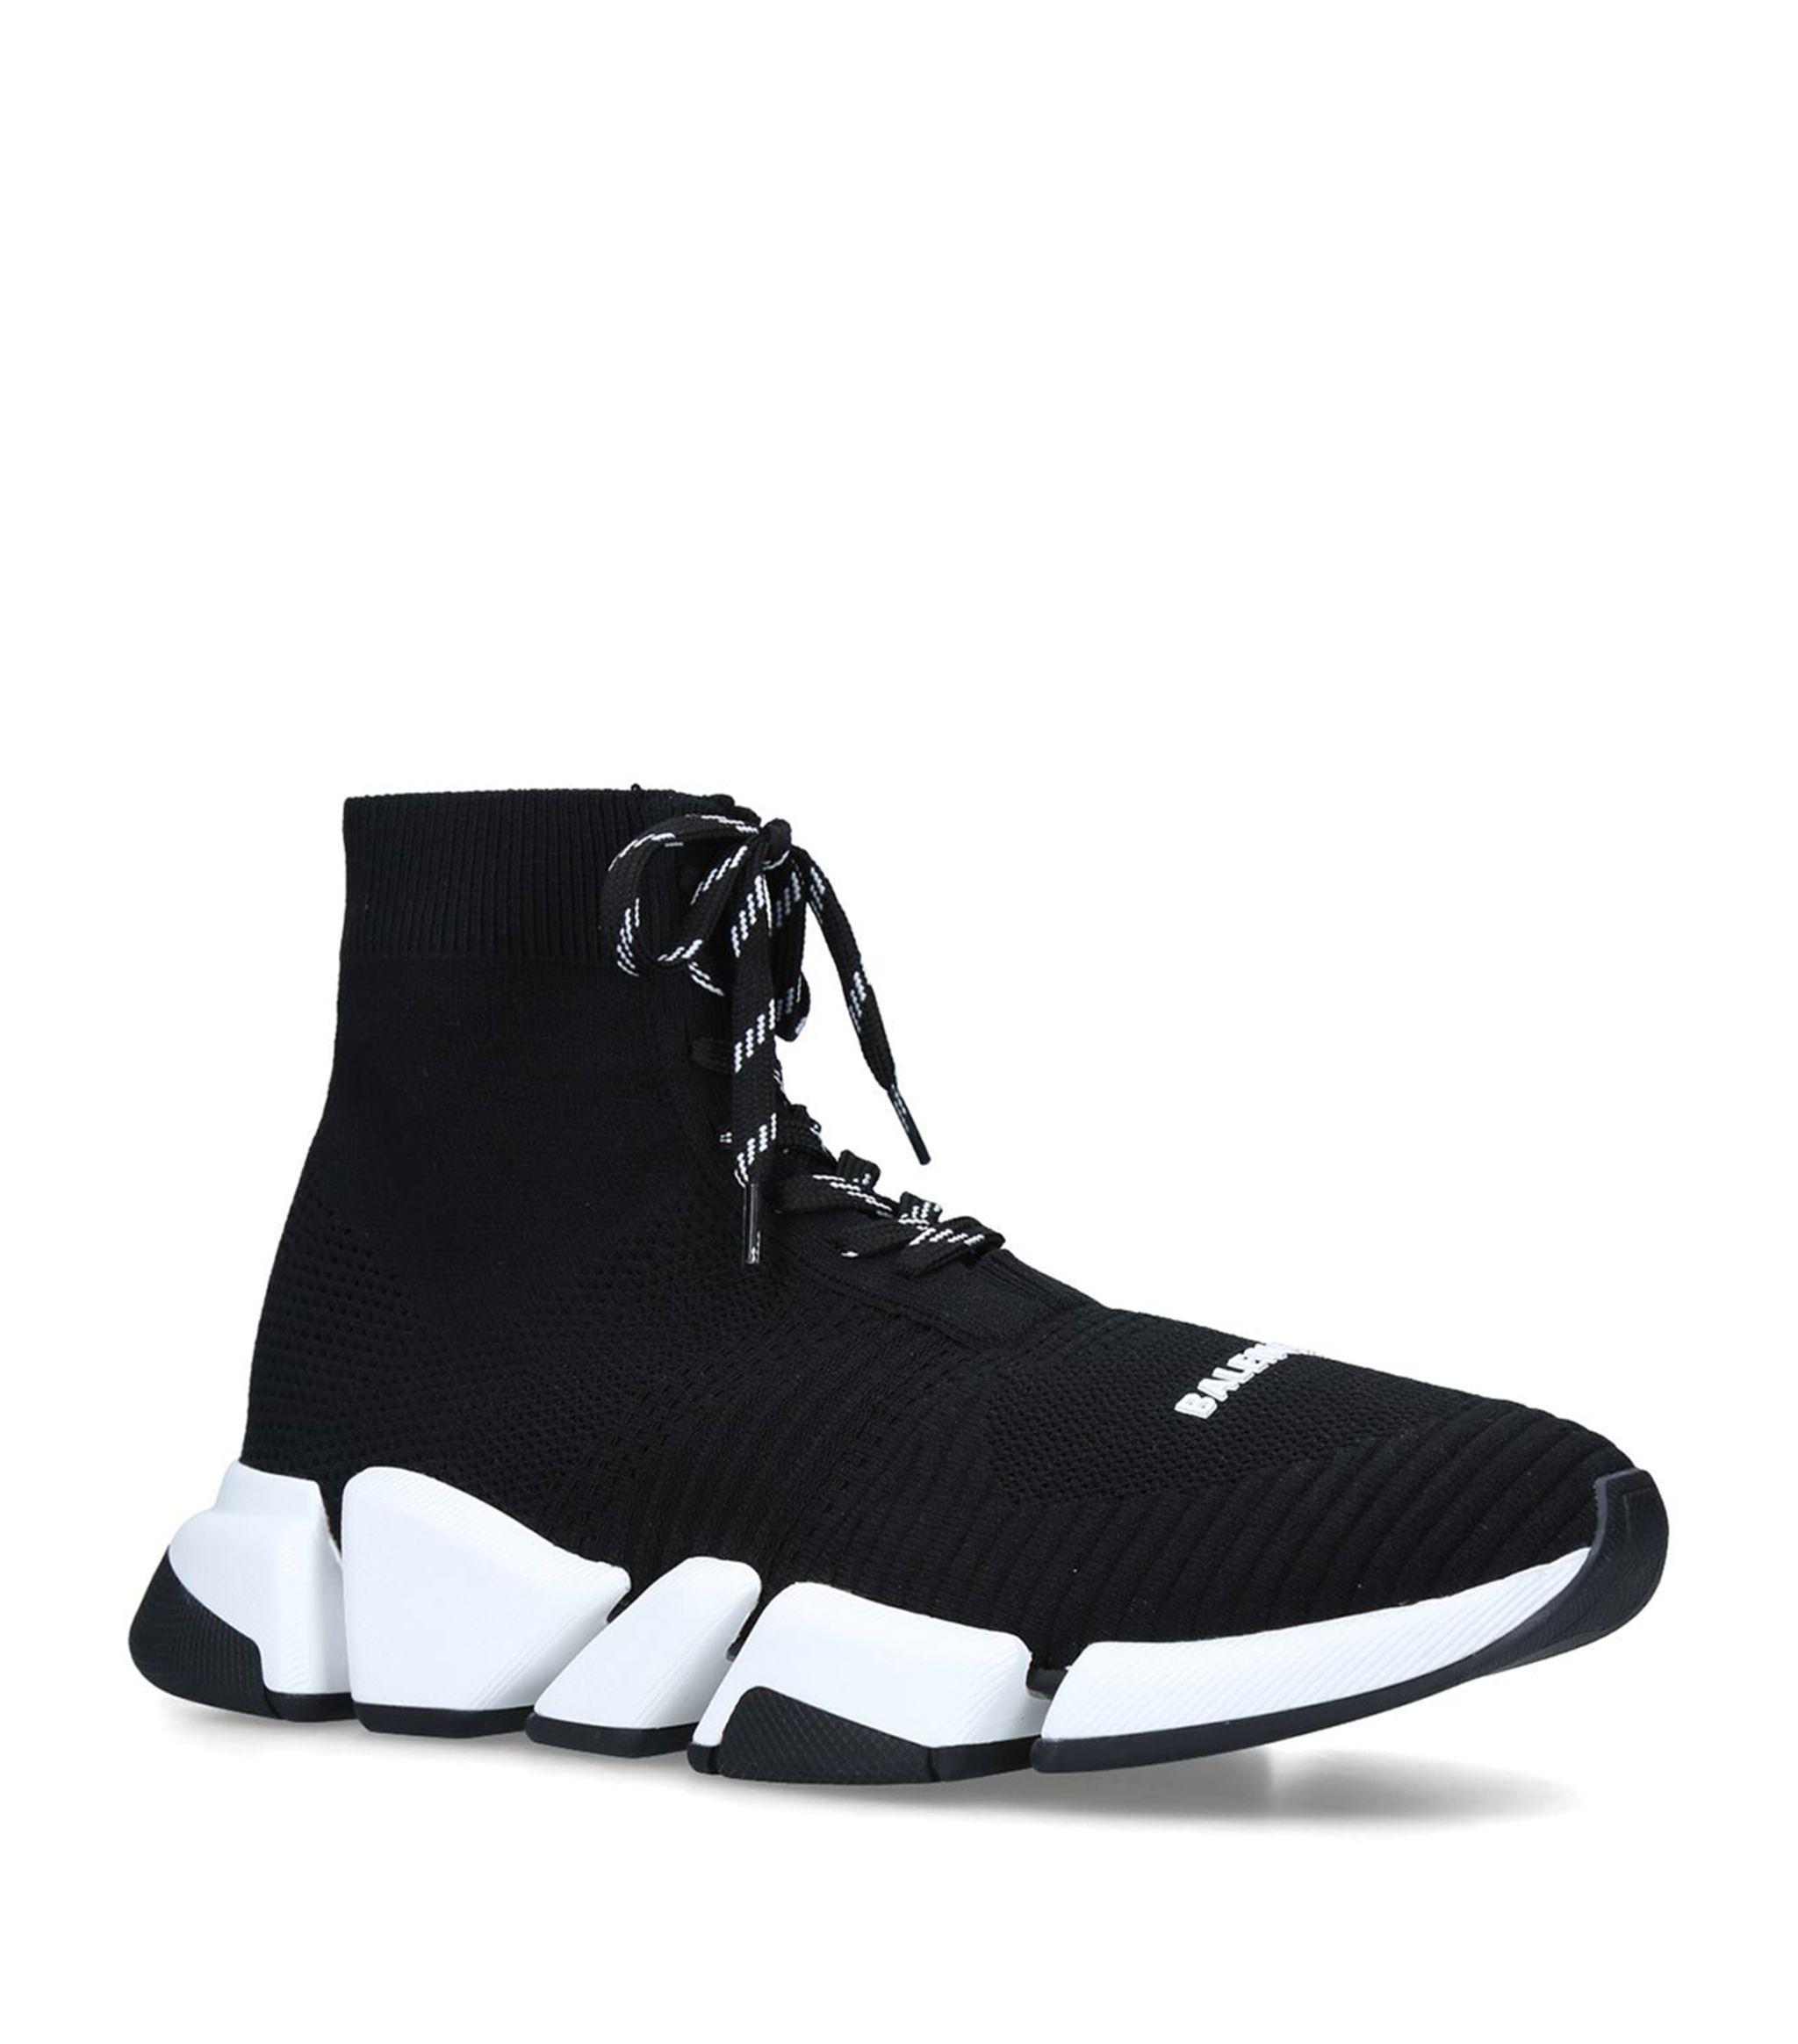 Balenciaga Synthetic Speed 2.0 Lace-up Sneakers in Black for Men - Lyst